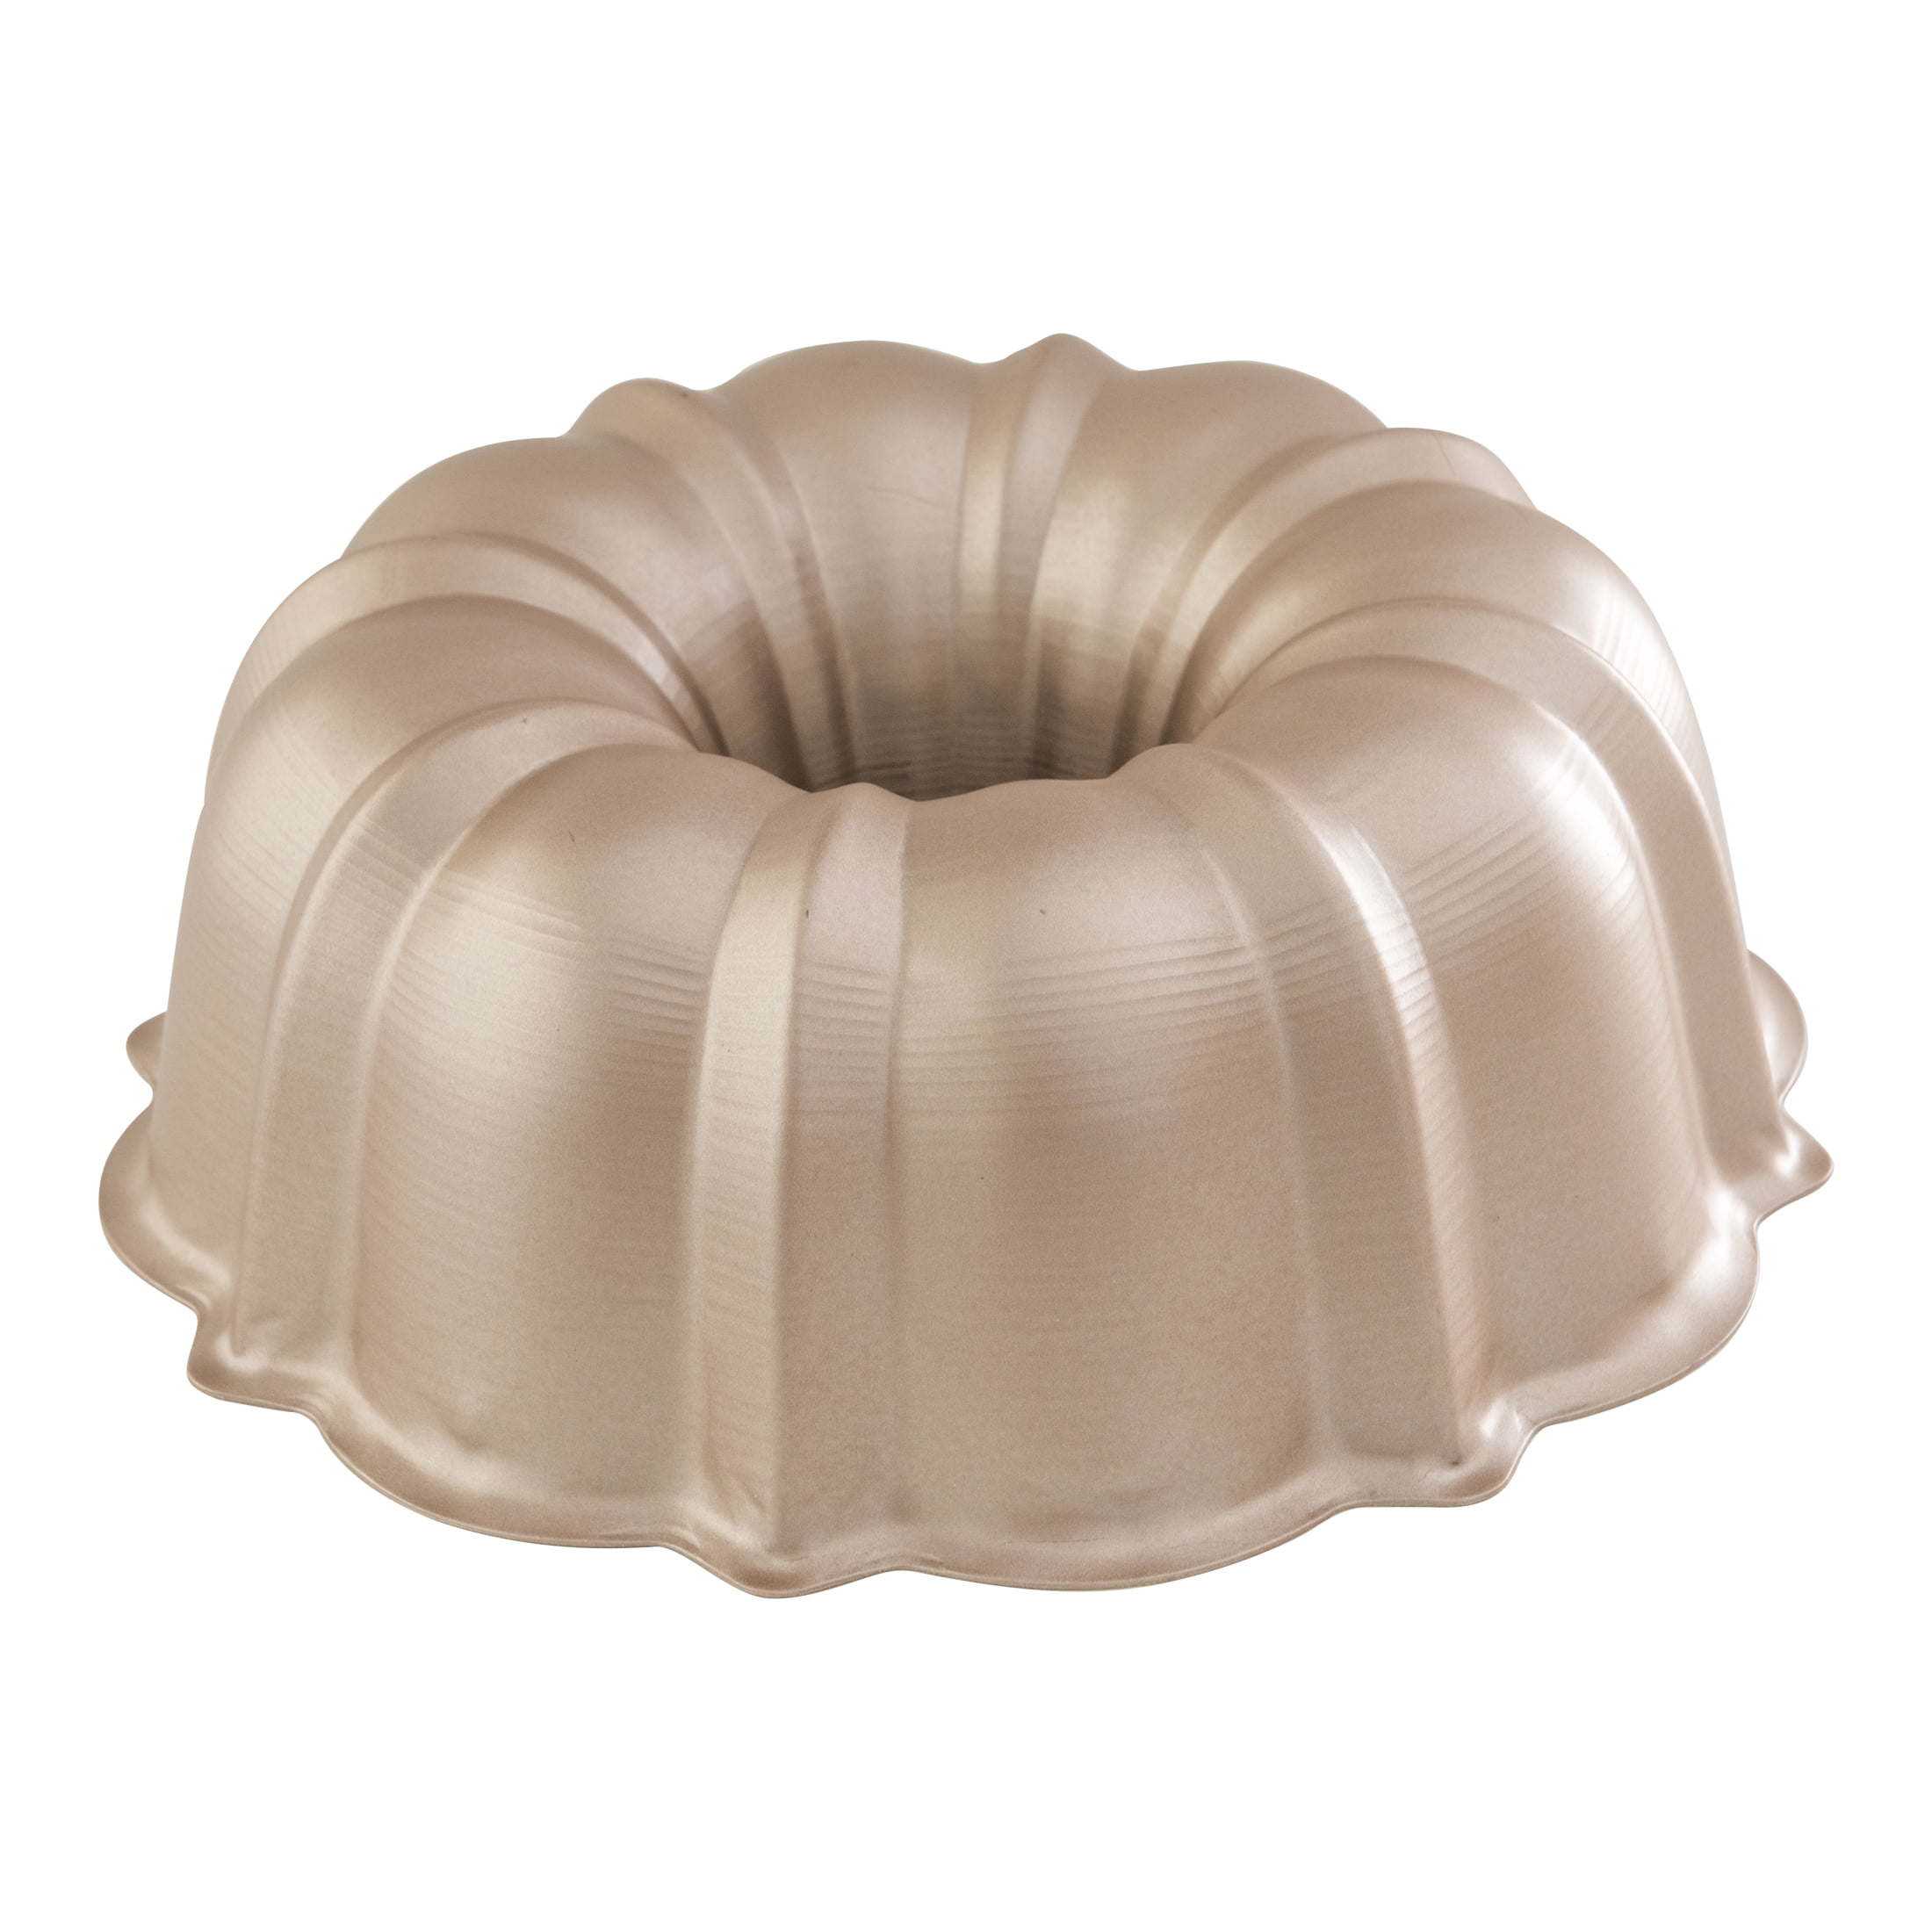 The Best Bundt Pan Will Turn Out Maximal Cakes with Minimal Effort | Bon  Appétit